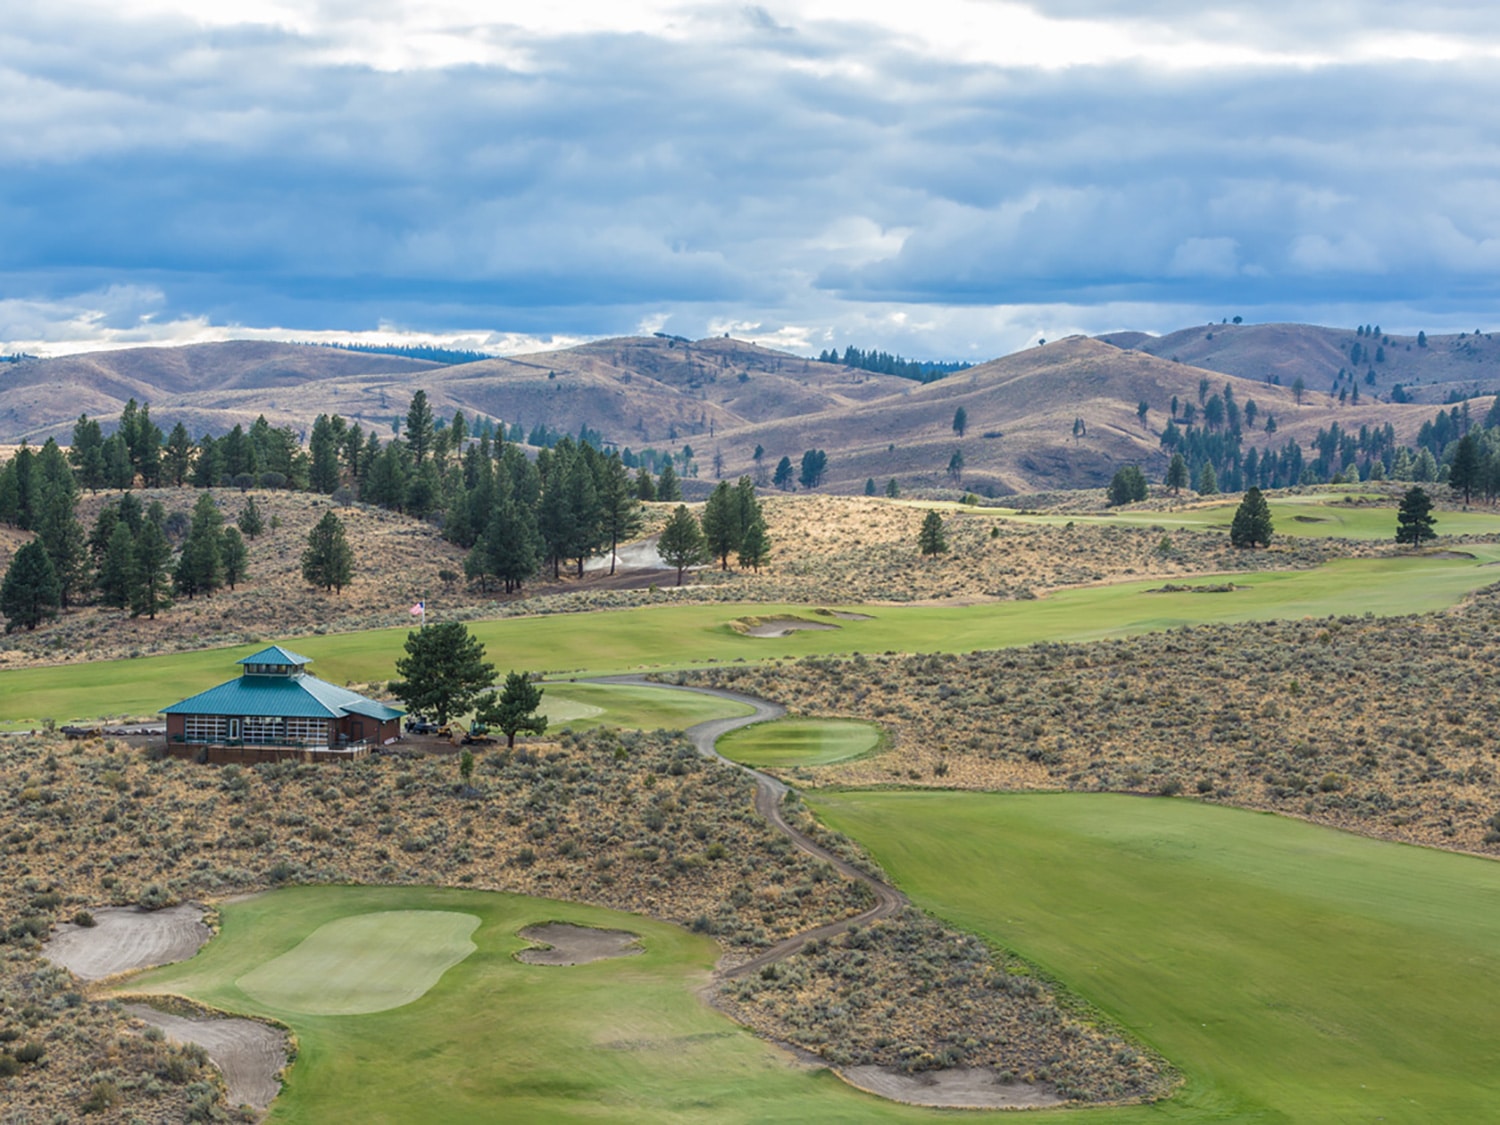 Silvies Valley Ranch in Oregon is home to a variety of celebrated golf courses, from challenging 18-hole designs to the world’s first reversible putting course.